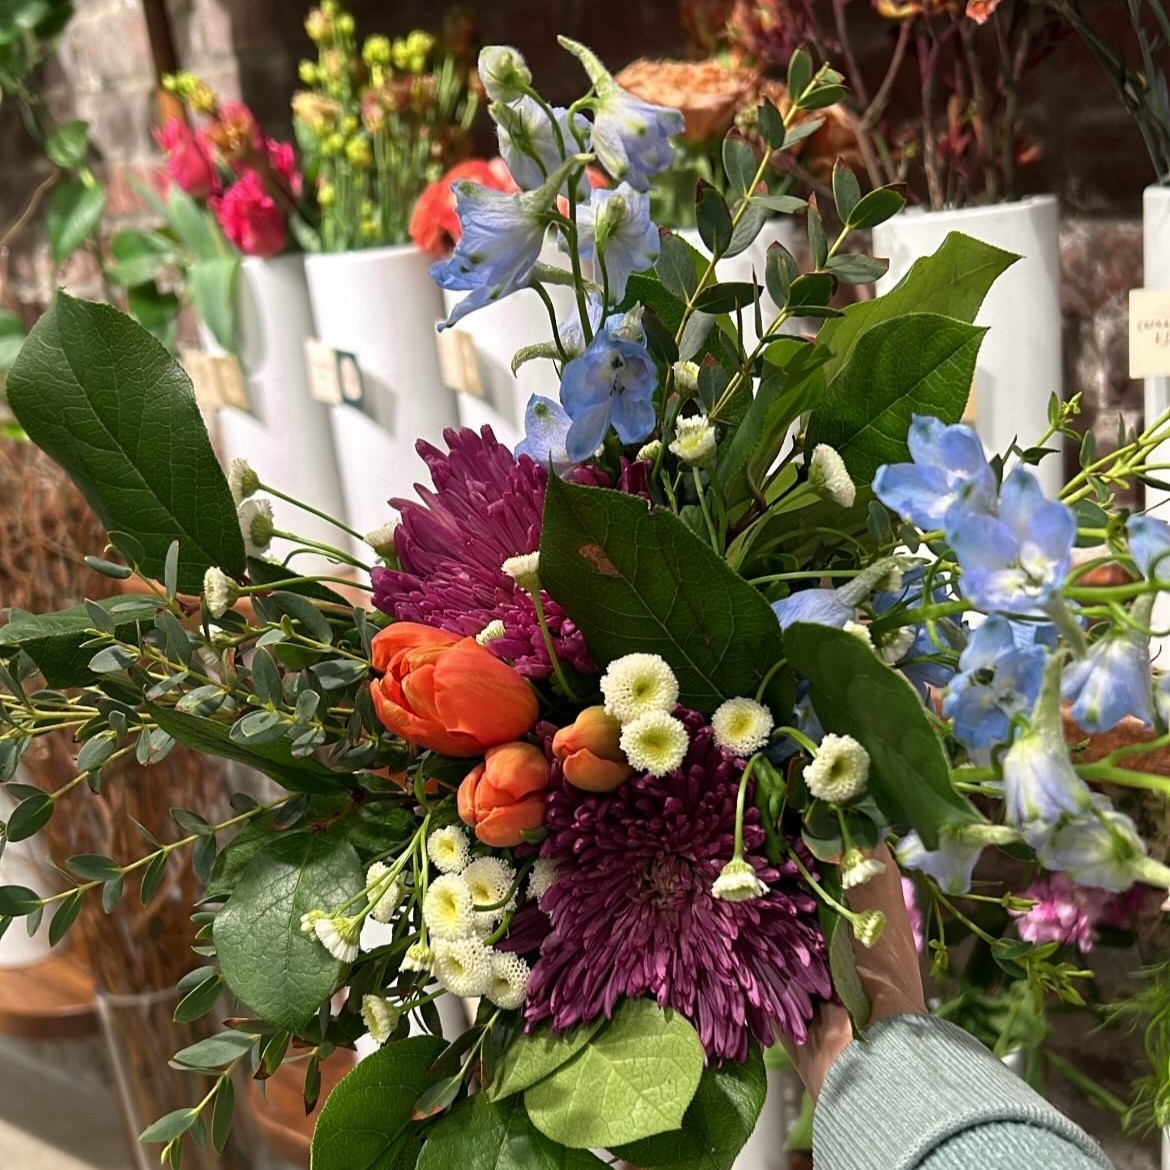 KIB Ambassadors are our superstar volunteers that turn every project into a budding success. 🌷 Thanks to our friends at @flowerboysindy, we celebrated their spirit and dedication with a Flower Arranging Workshop! 🌼💐 Get involved at: bit.ly/3GqSAR0